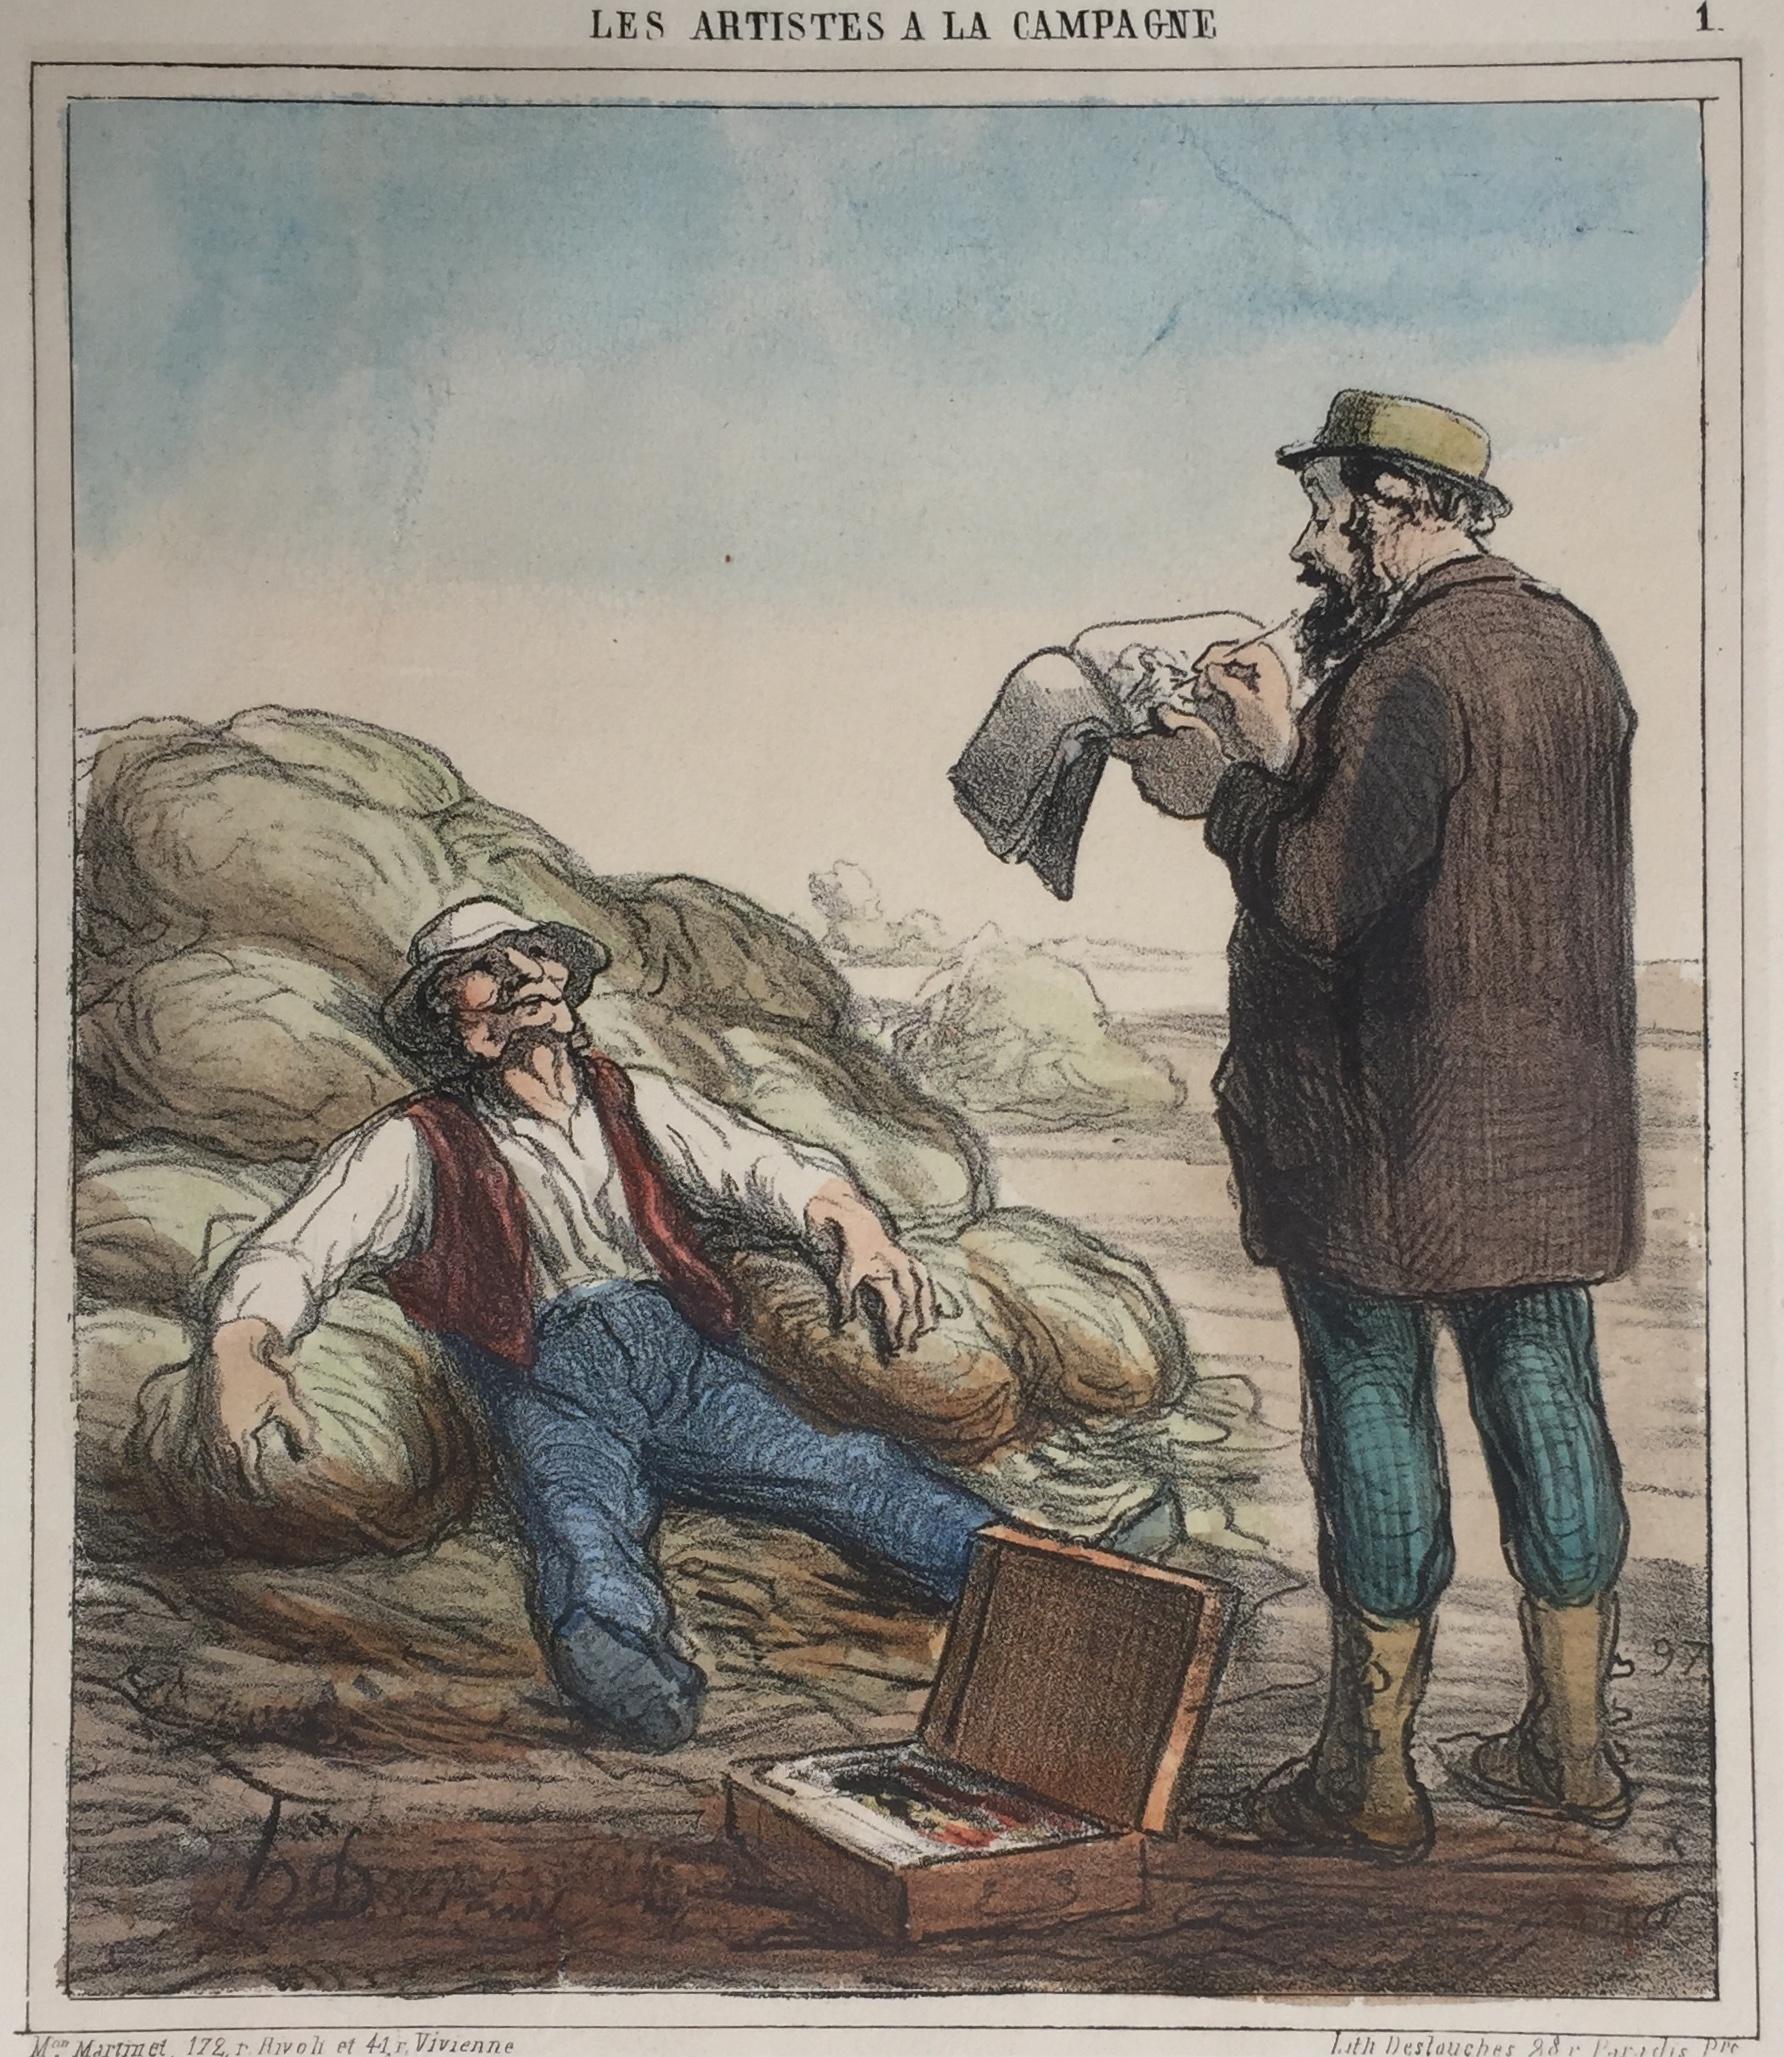 Honoré Daumier Figurative Print - ARTIST IN THE COUNTRYSIDE